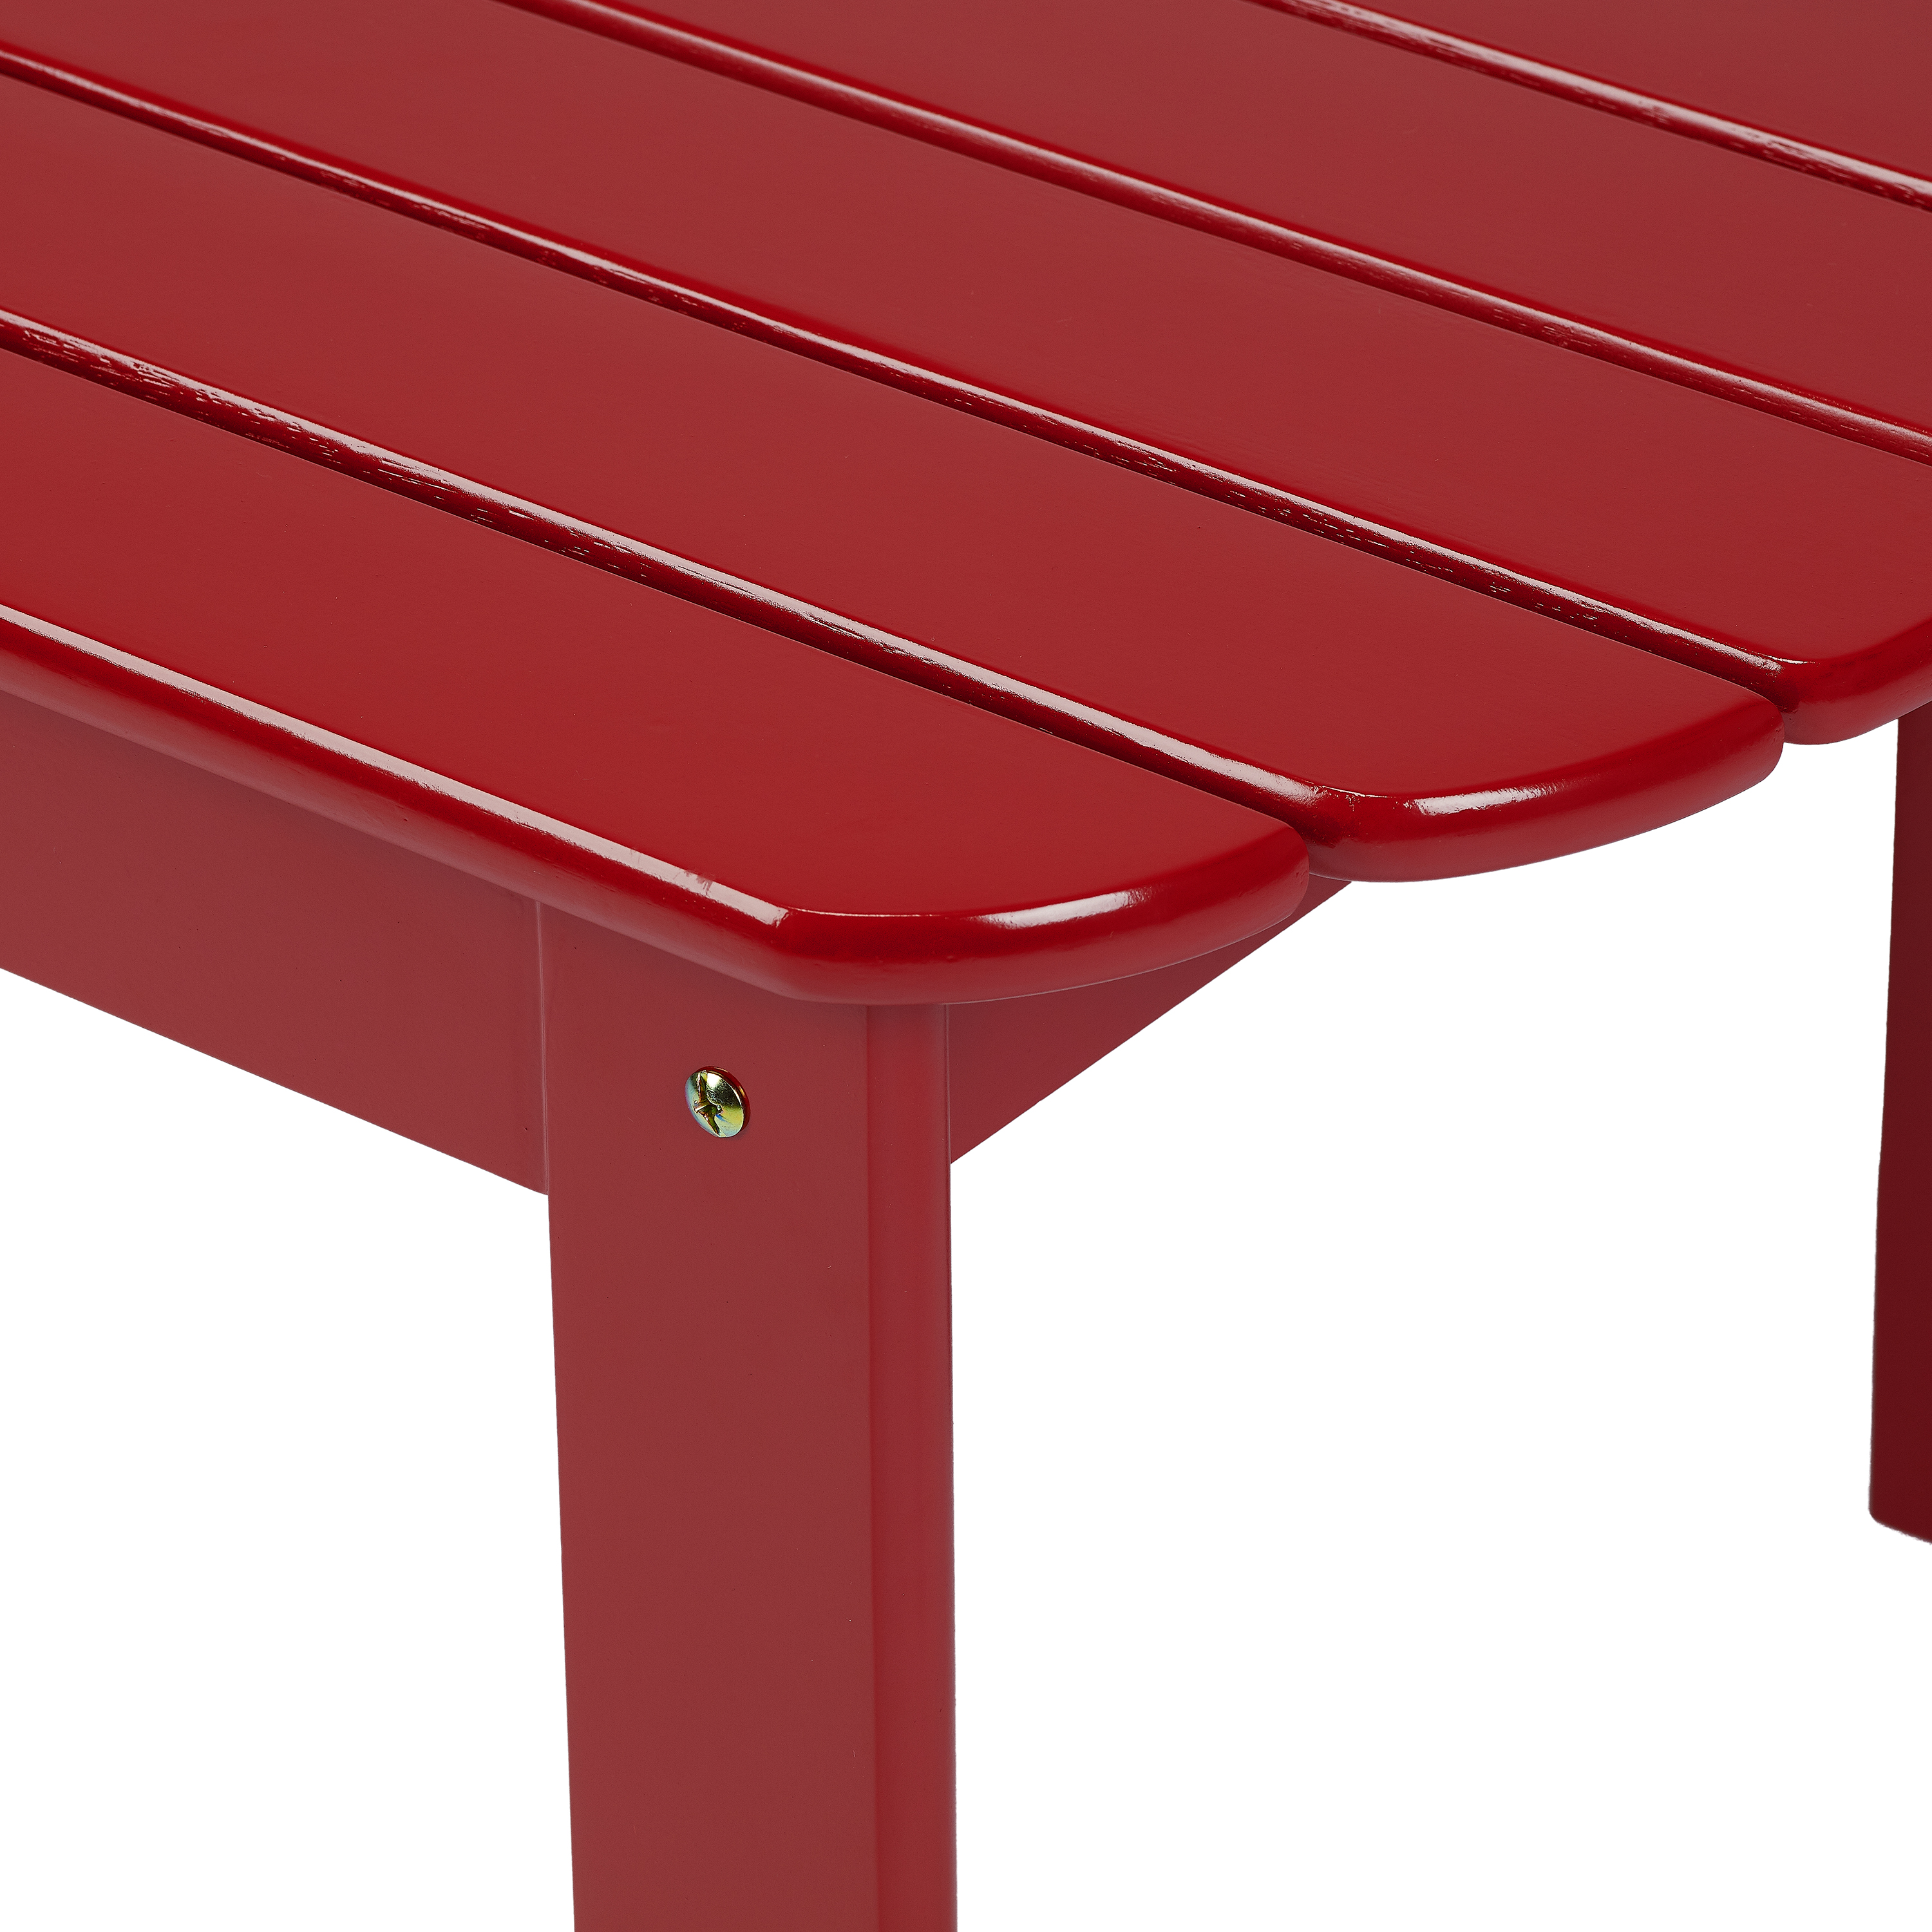 Mainstays Wood Adirondack Outdoor Side Table, Red - image 2 of 6